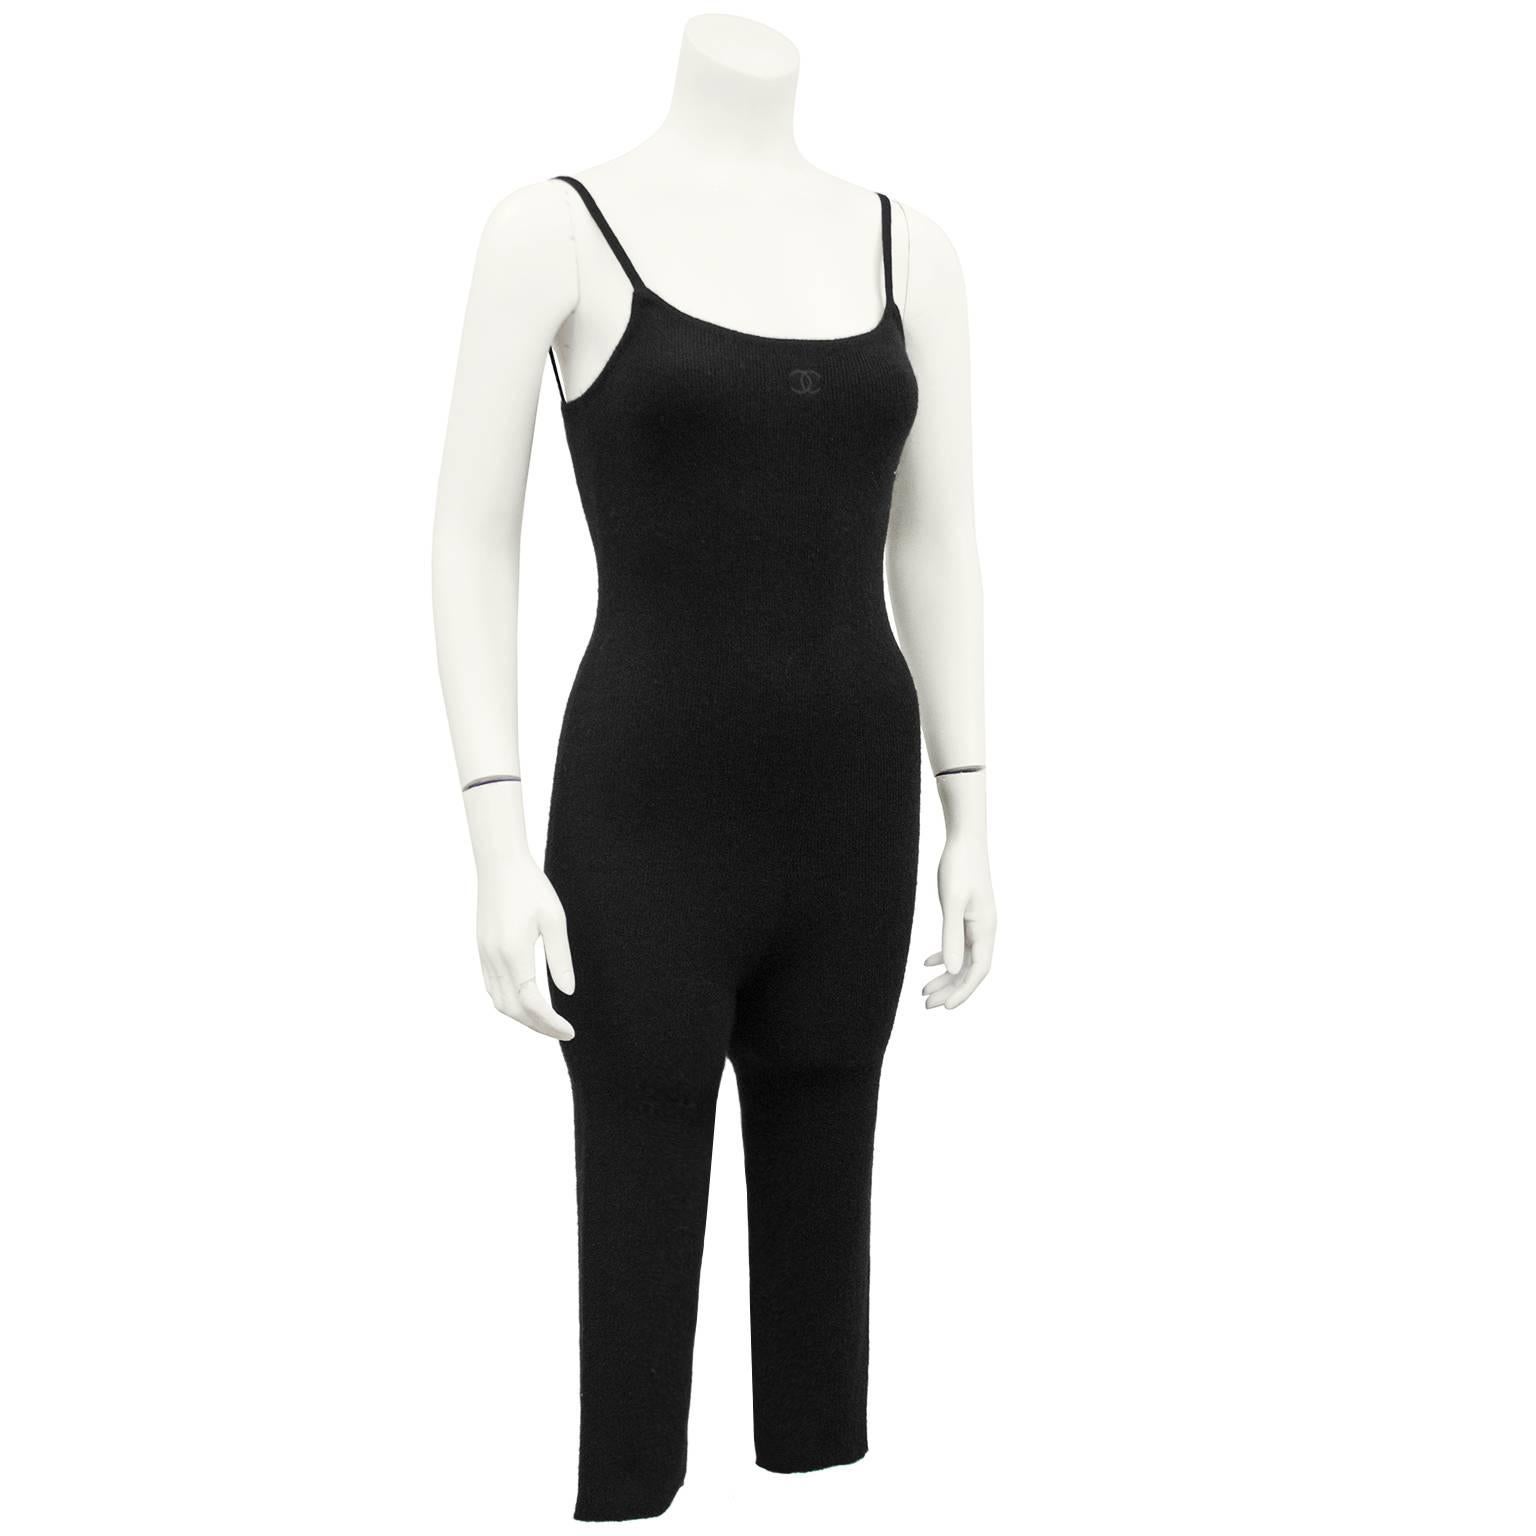 1990's gorgeous Chanel Scottish ribbed cashmere tank style one piece catsuit with cropped legs. Small tonal black Chanel CC logo center front. Perfect for under ski attire or for a cozy winter night by the fire. Excellent vintage condition. Fits